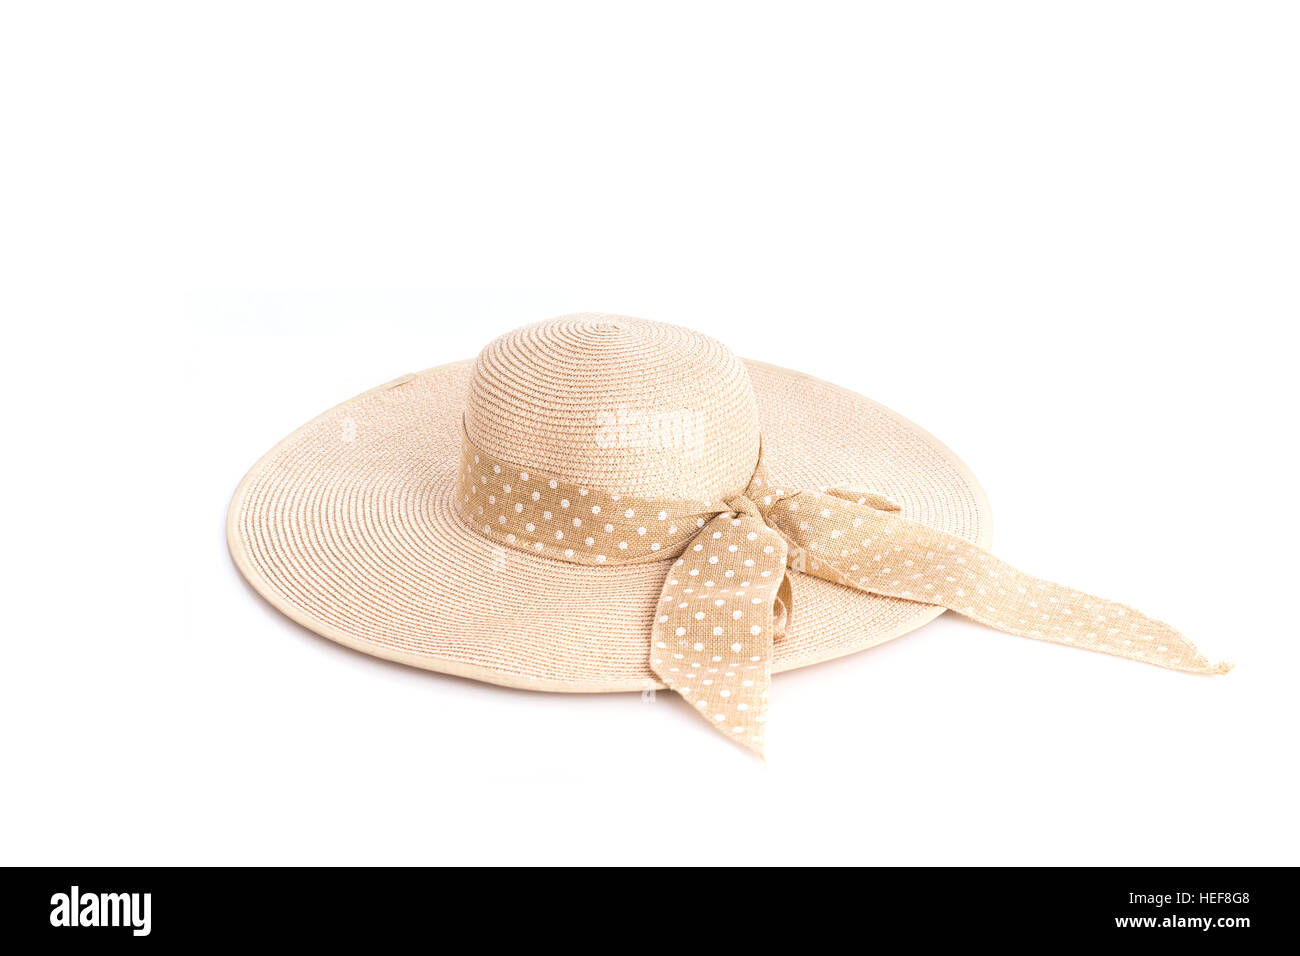 Close up vintage woman beach hat isolated on white background Stock Photo